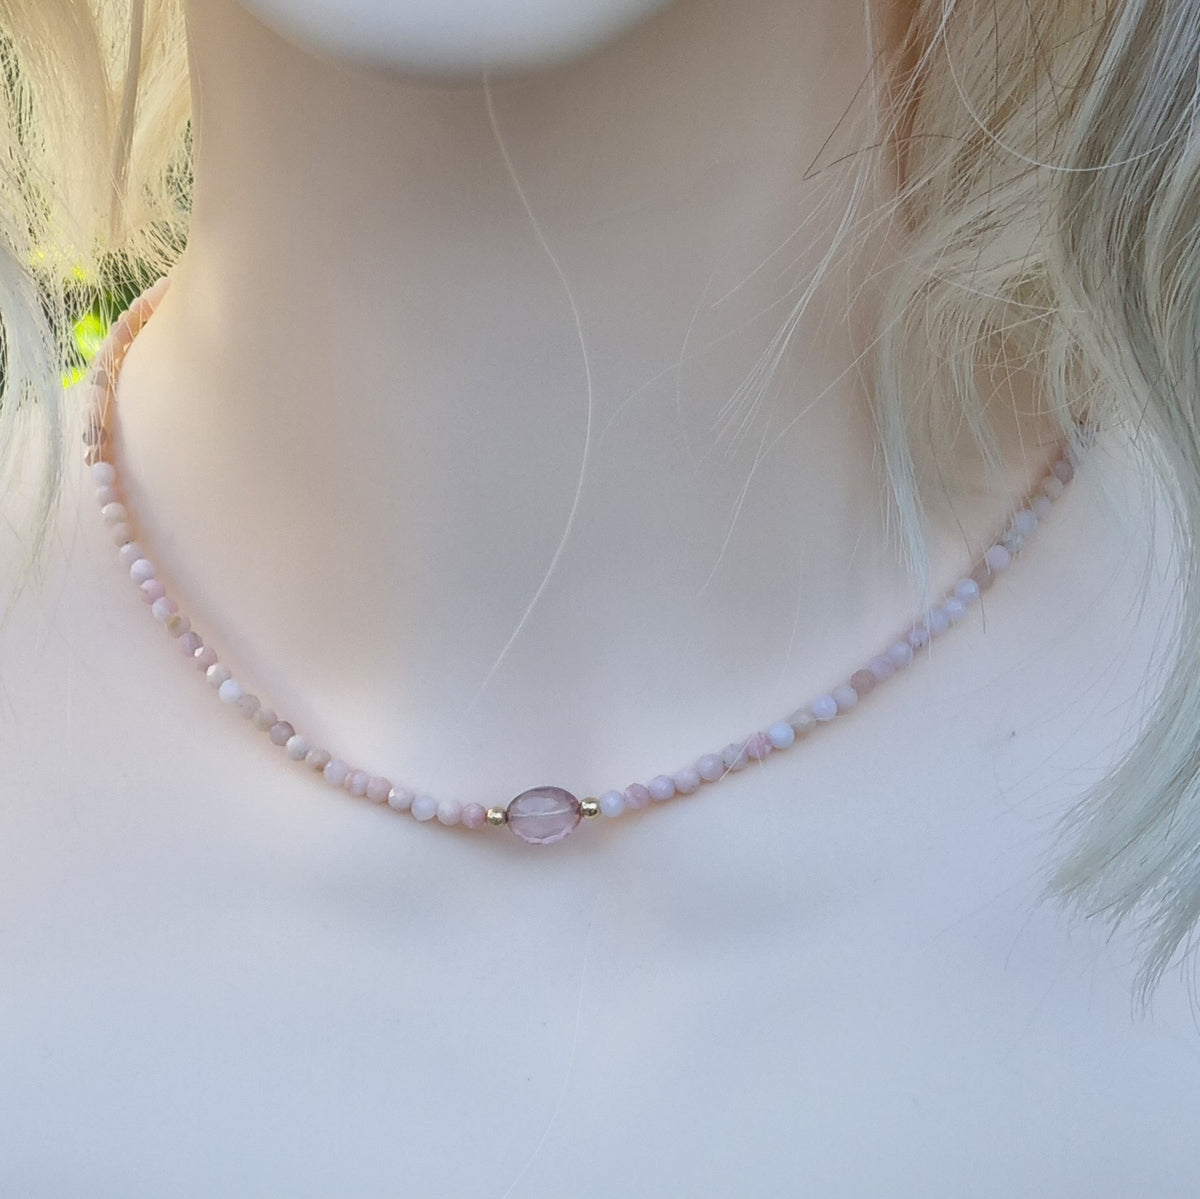 Gianna Pink Opal with Carnelian or Mystic Quartz Necklace